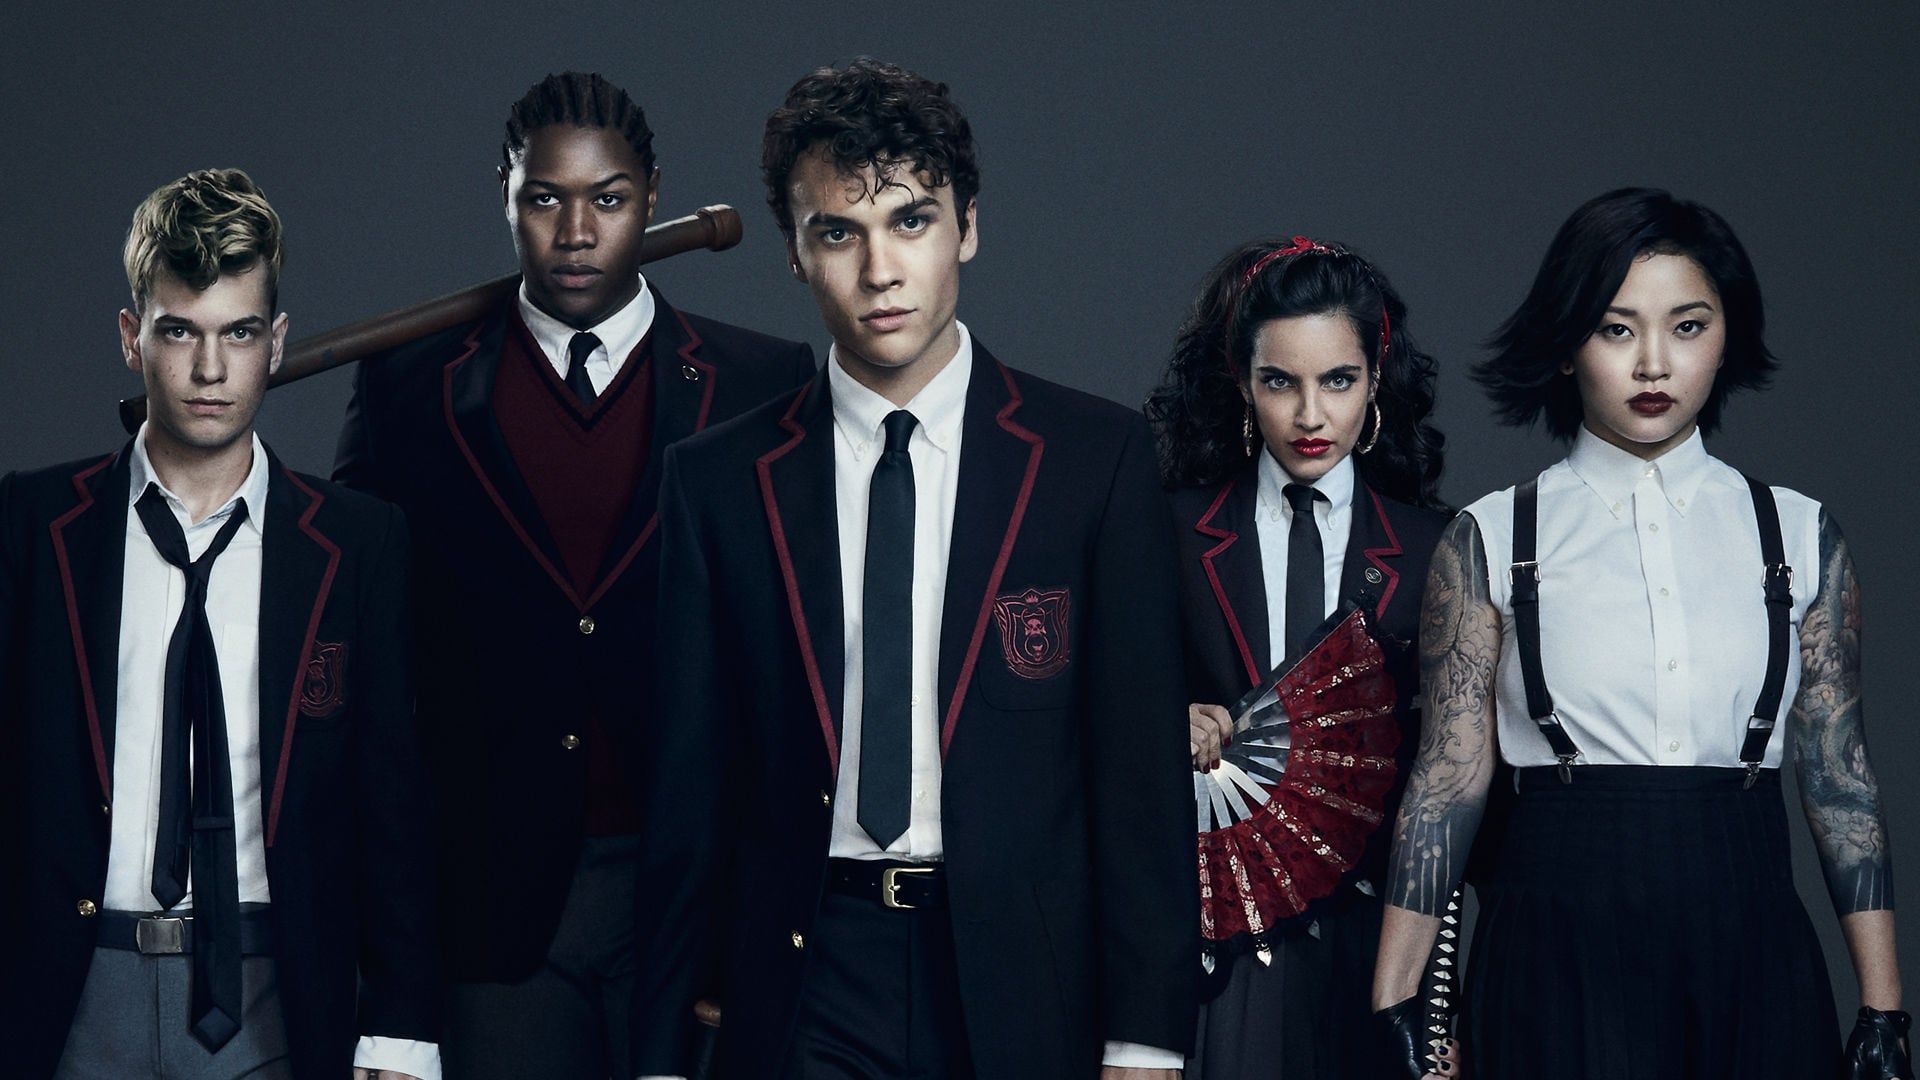 Deadly Class Episodes on Starz or Streaming Online Available in the UK